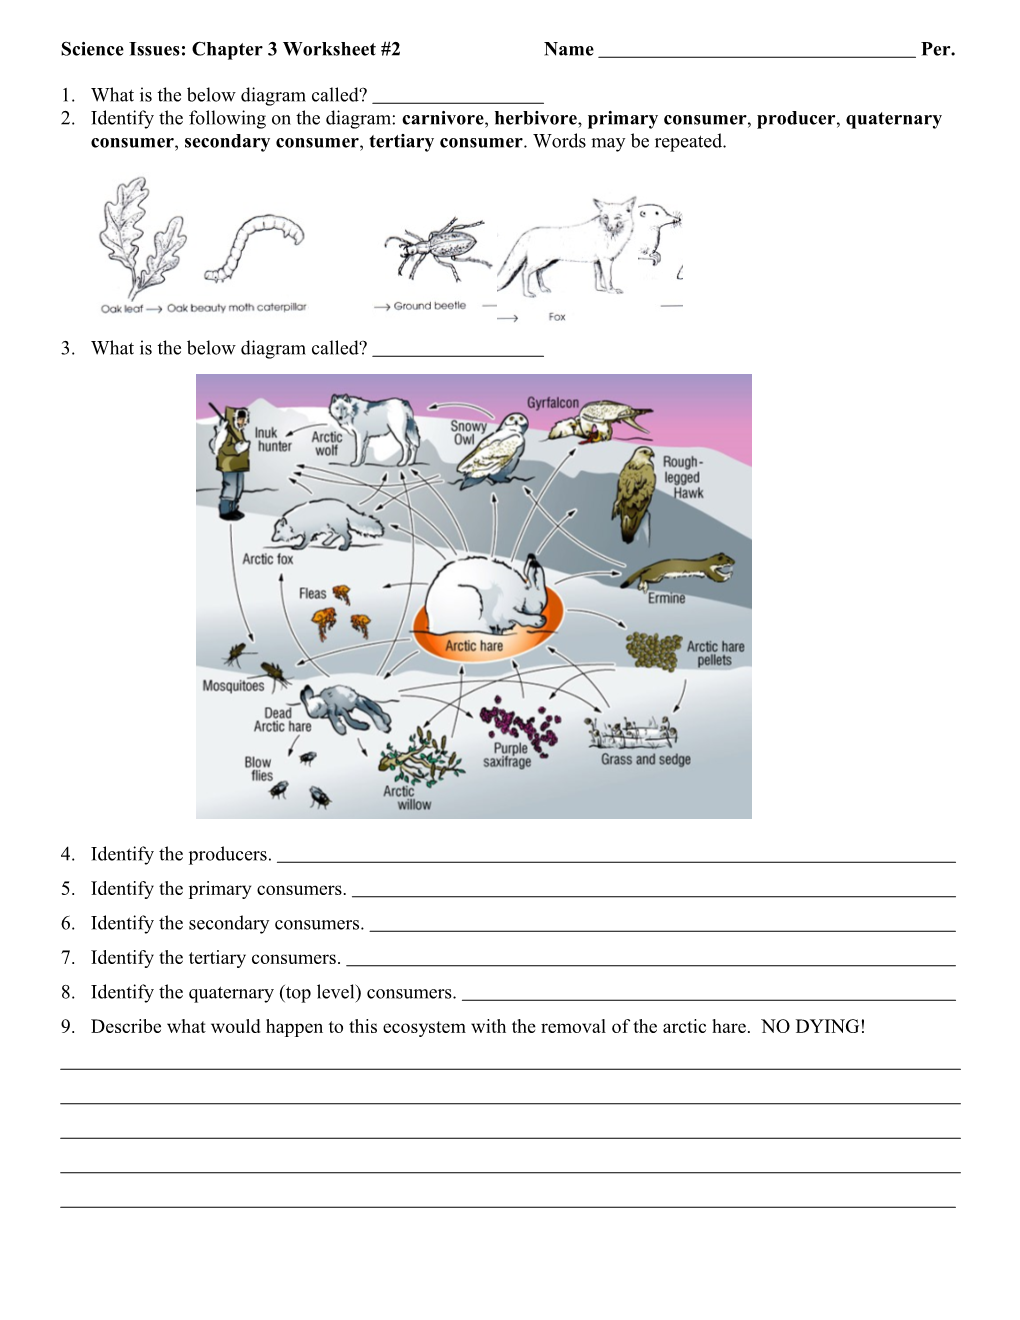 Science Issues: Chapter 3 Worksheet #2